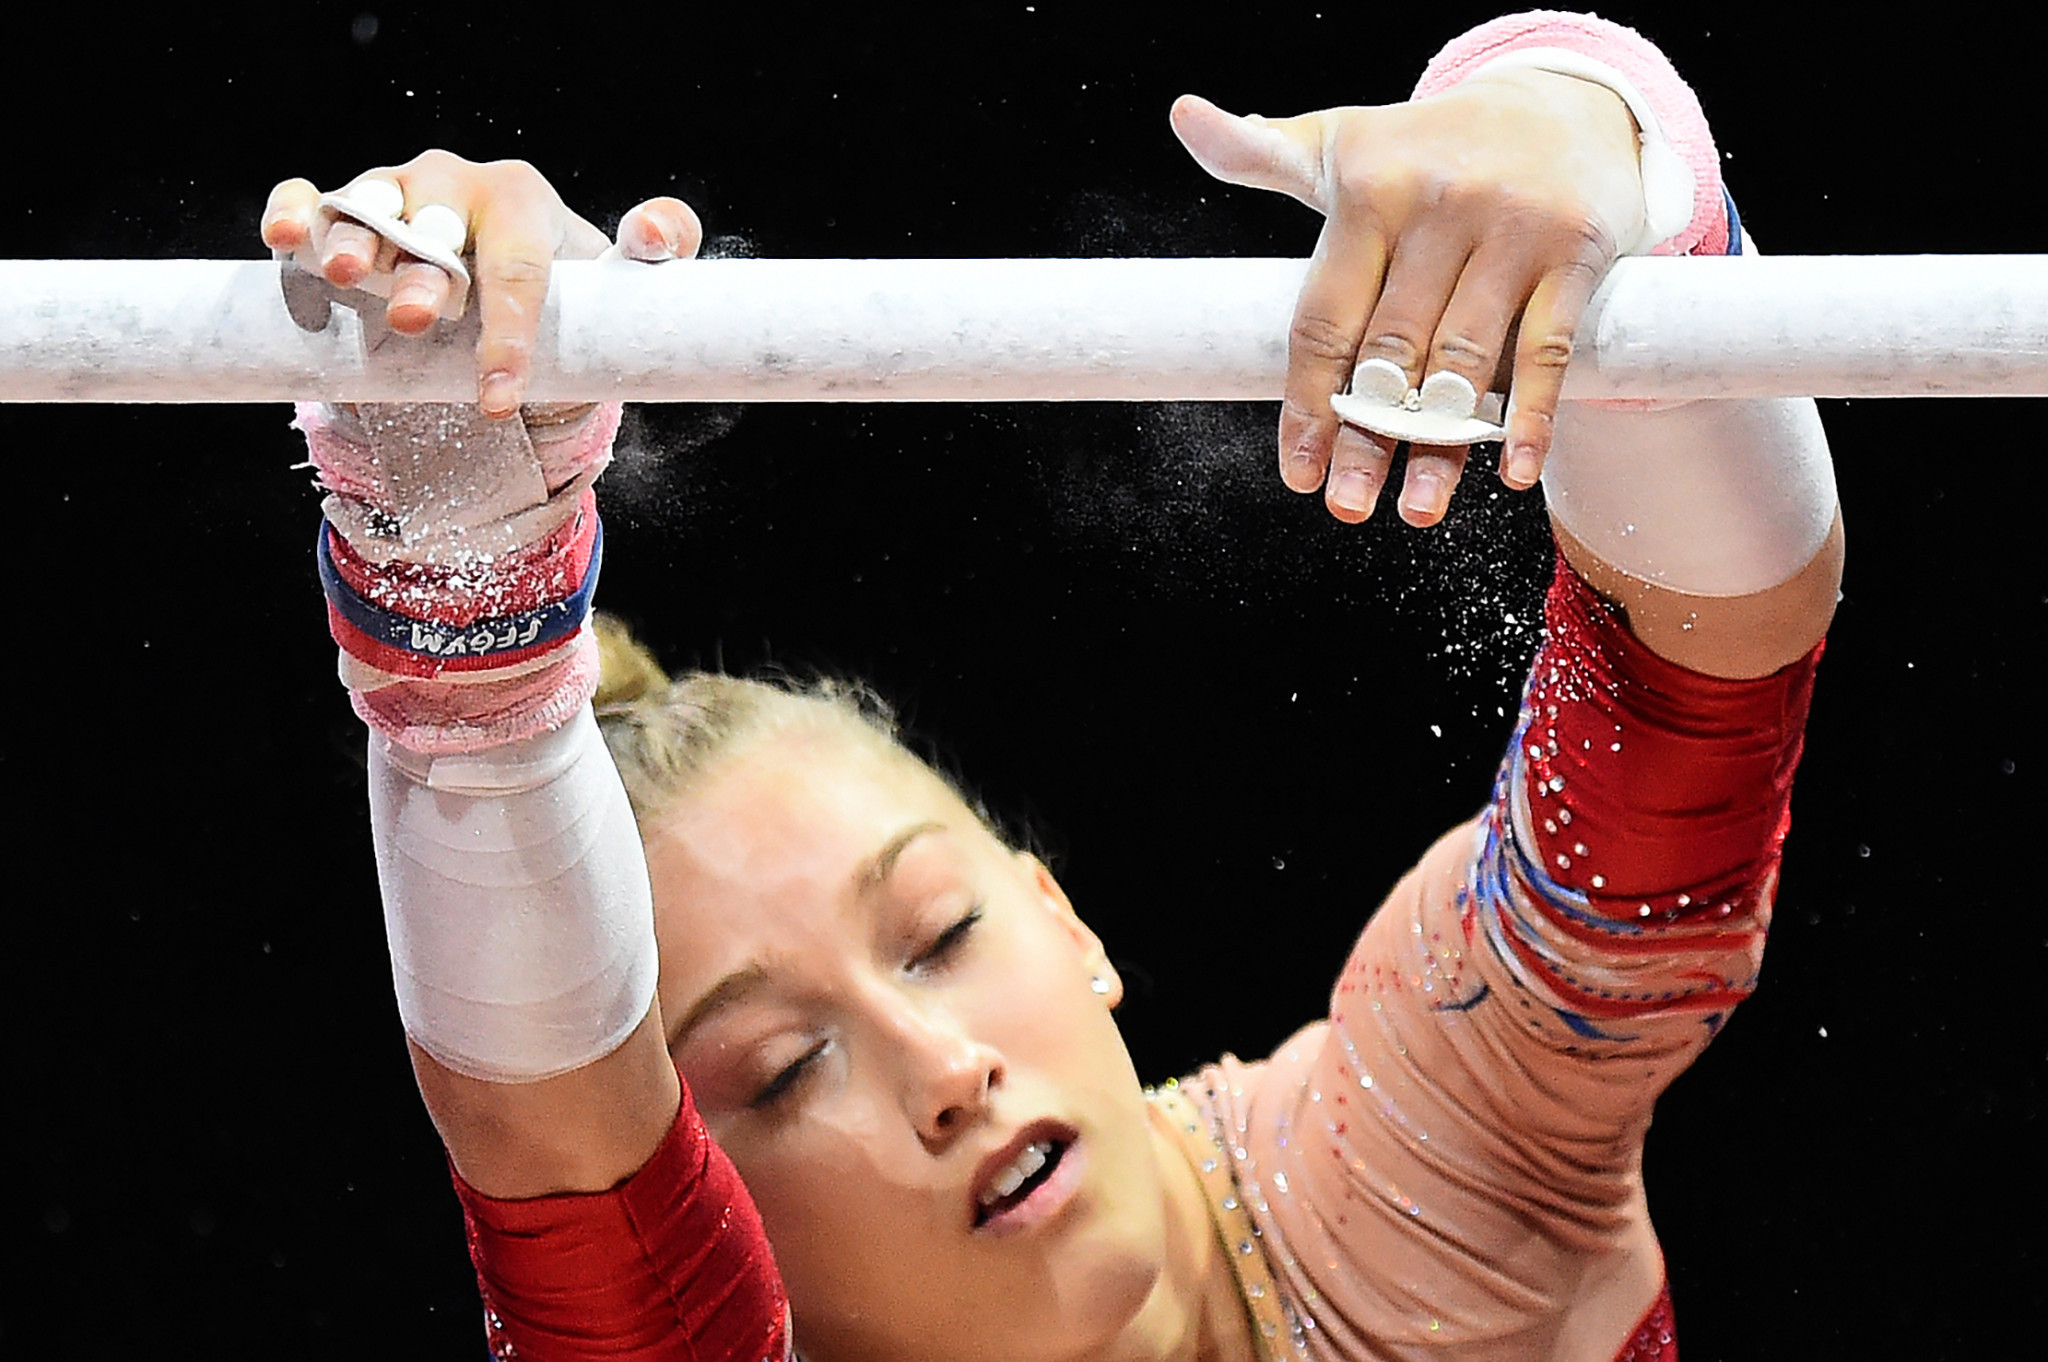 French gymnasts enjoy strong performances in qualification at FIG World Challenge Cup